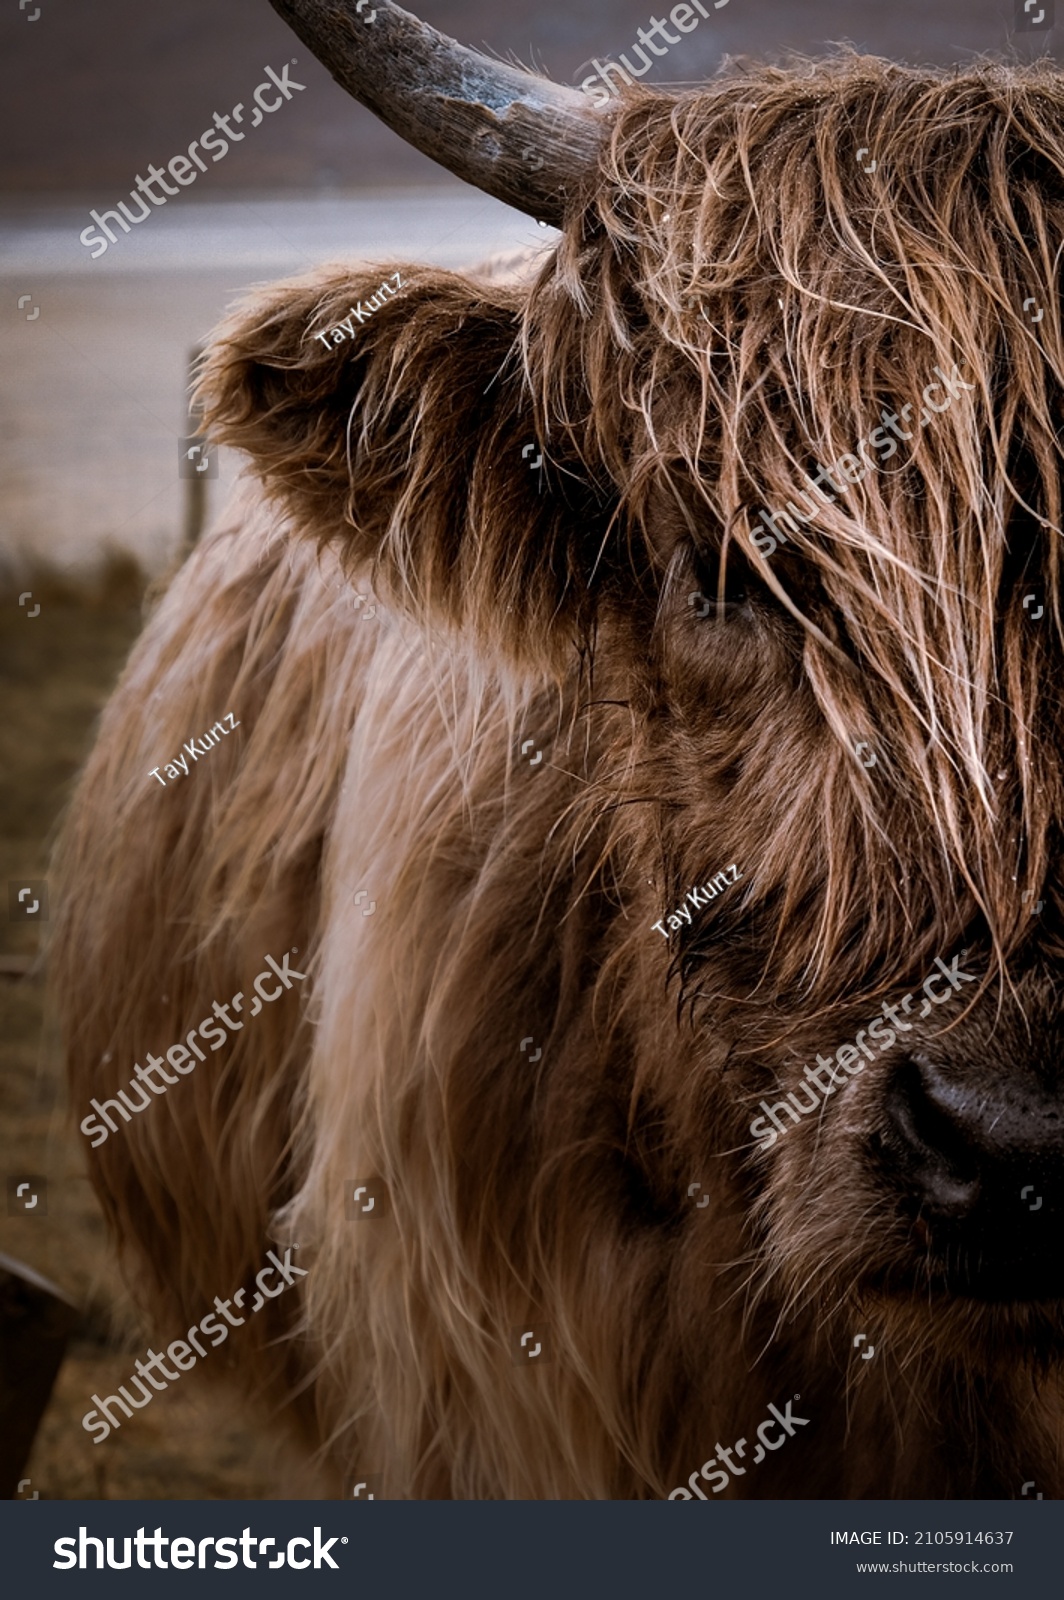 Hairy Heilan Coo - just out here looking all windswept and 'moo-dy' (pun intended!). Scotland's highland cattle are a beautiful sight to behold. Who knows if they can actually see where they are going #2105914637